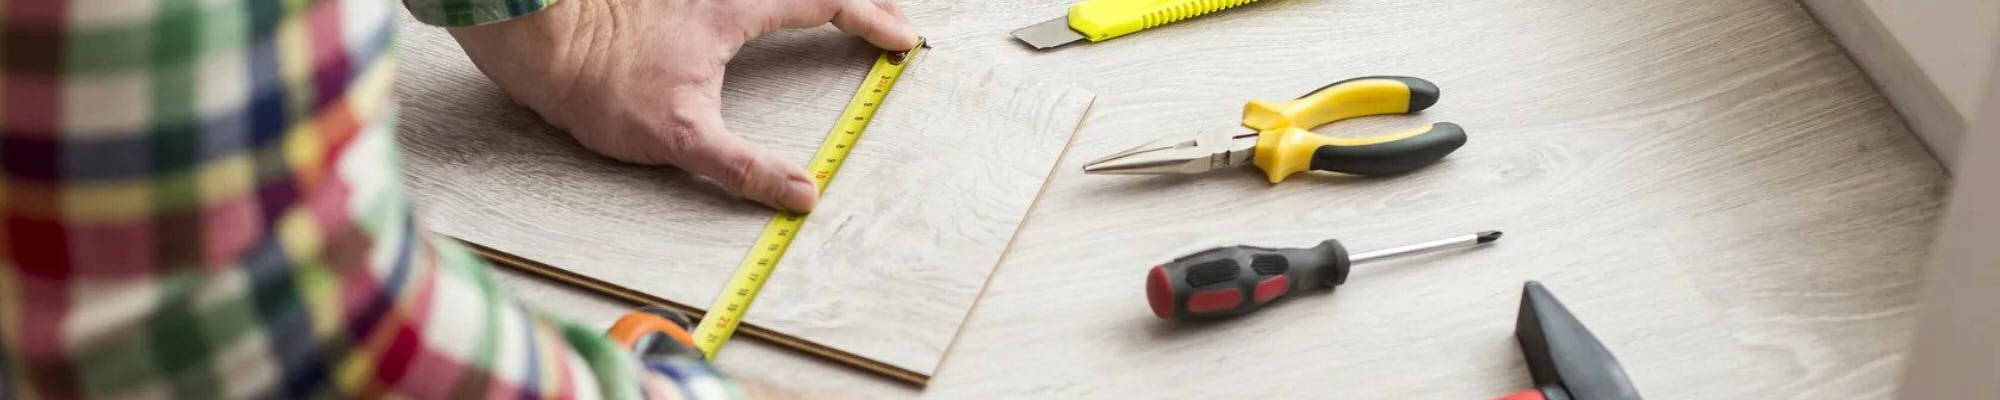 Learn more about the Free in-home measurement services offered by A&E Flooring in Collegeville, PA.